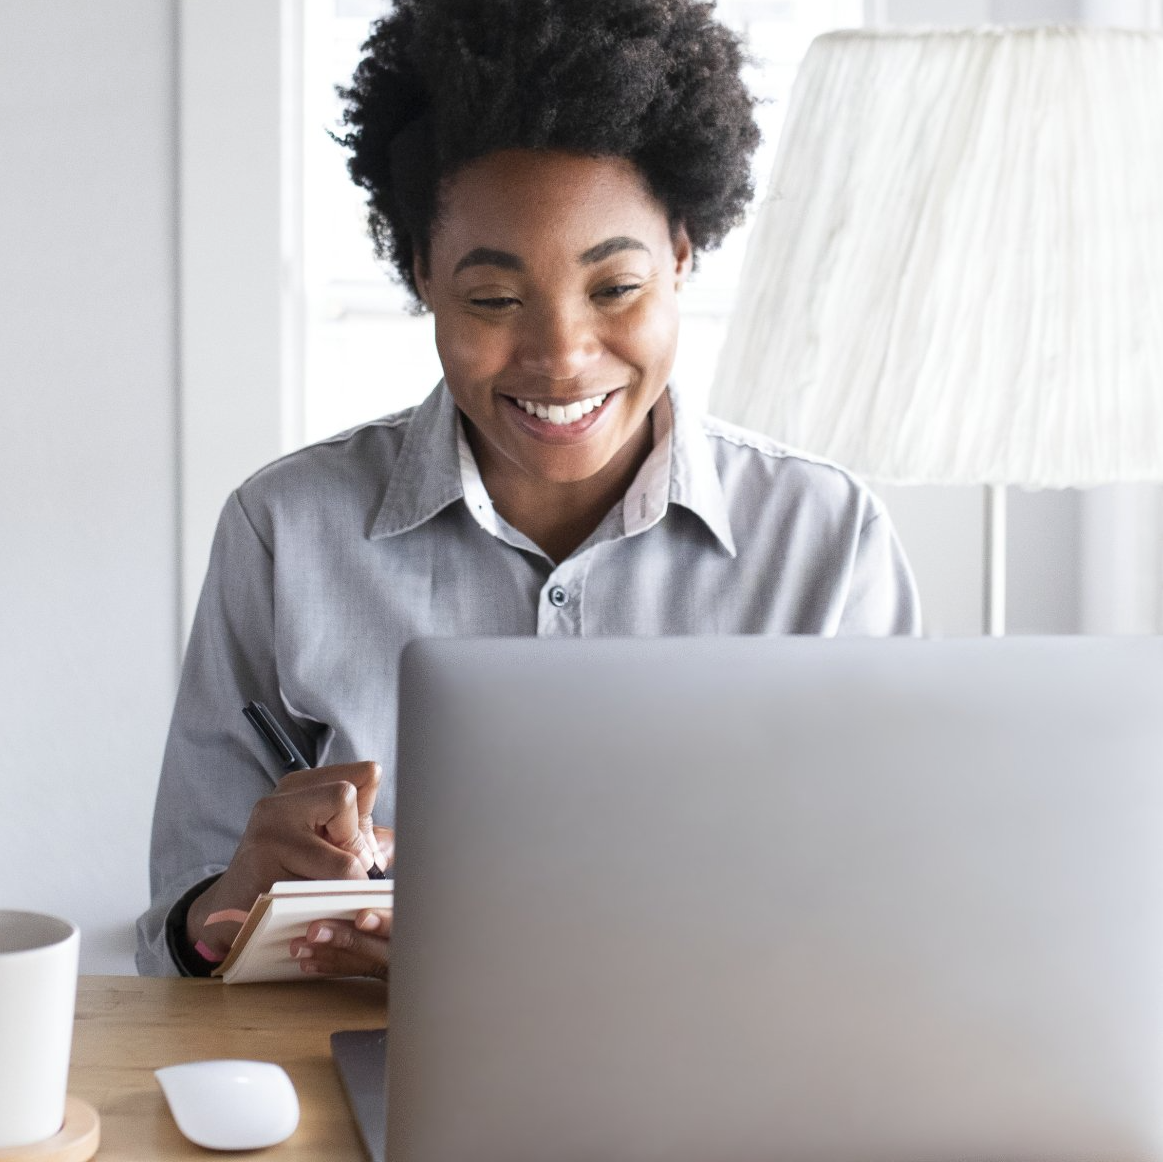 A woman is smiling while using a laptop computer